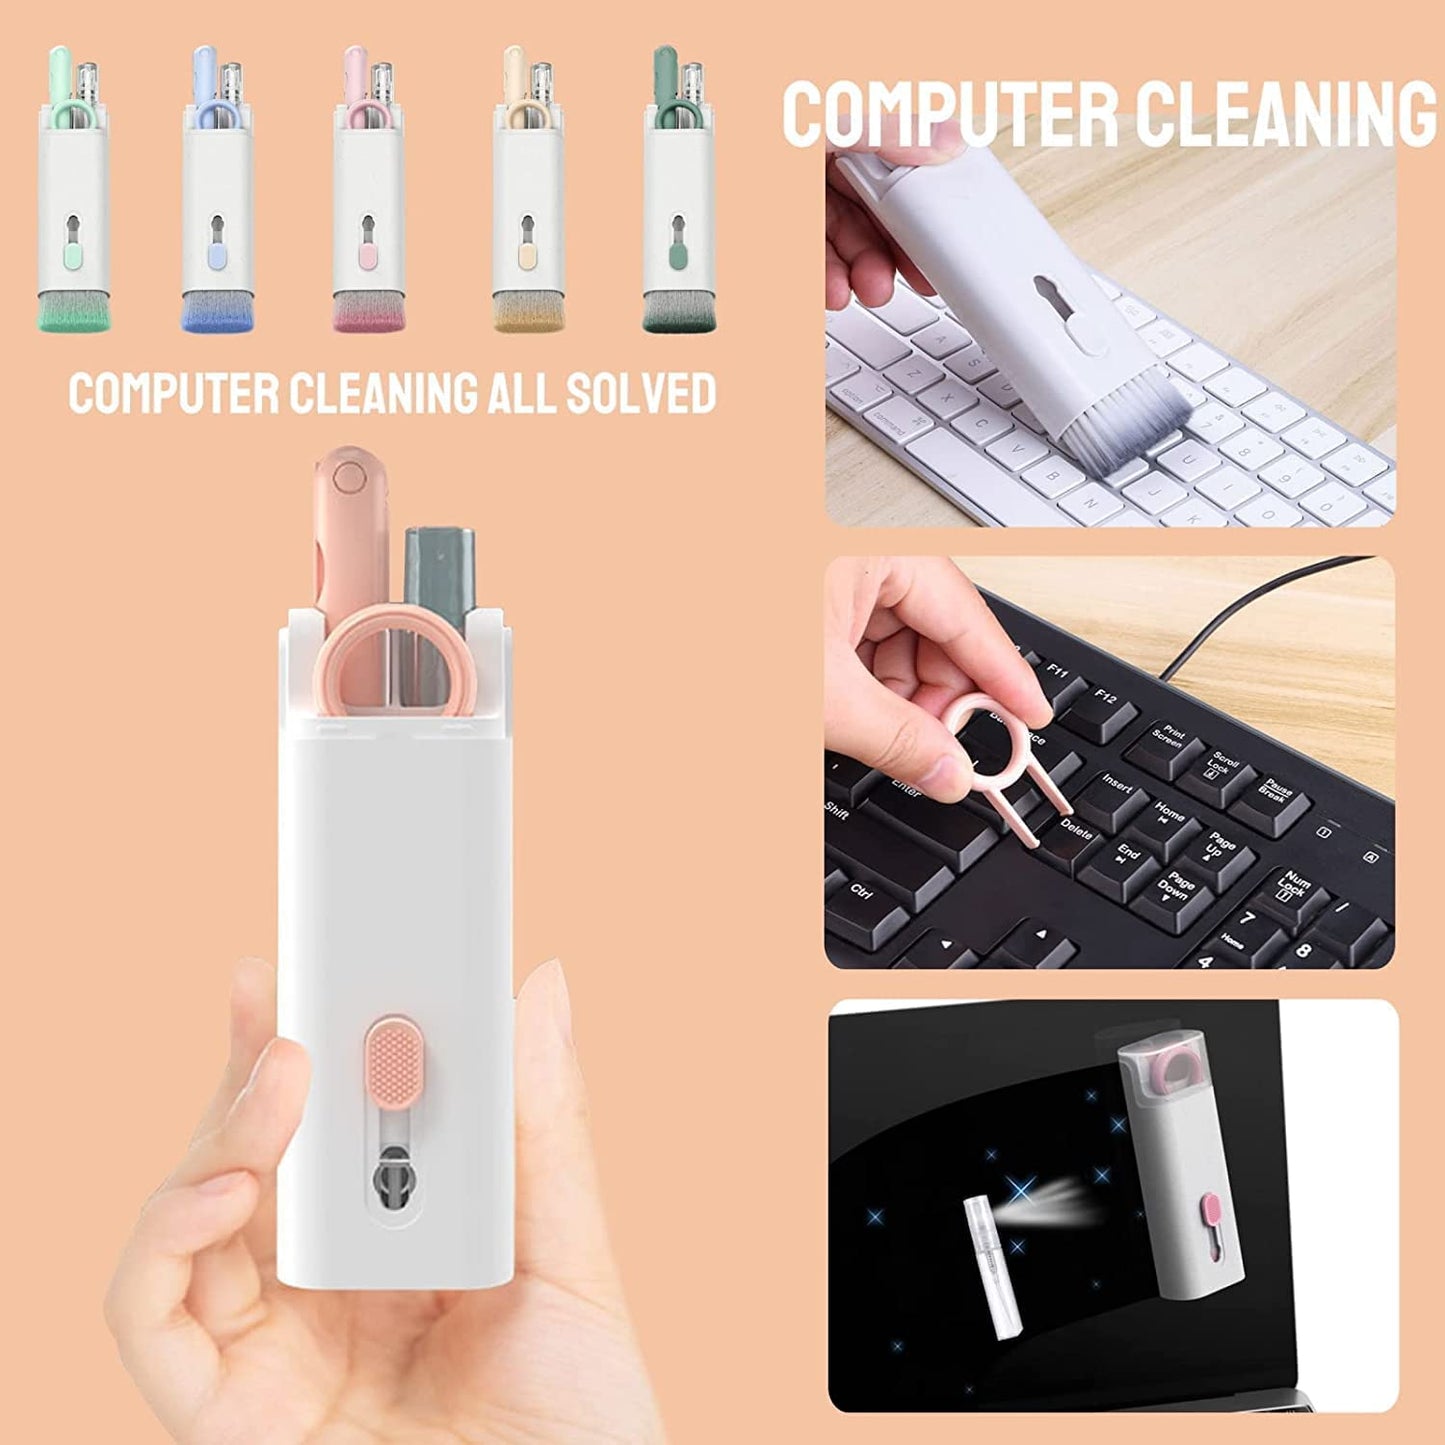 7 in 1 Electronic Cleaner kit, Cleaning Kit for Monitor Keyboard Airpods, Screen Dust Brush Including Soft Sweep, Swipe, Airpod Cleaner Pen, Key Puller and Spray Bottle 02